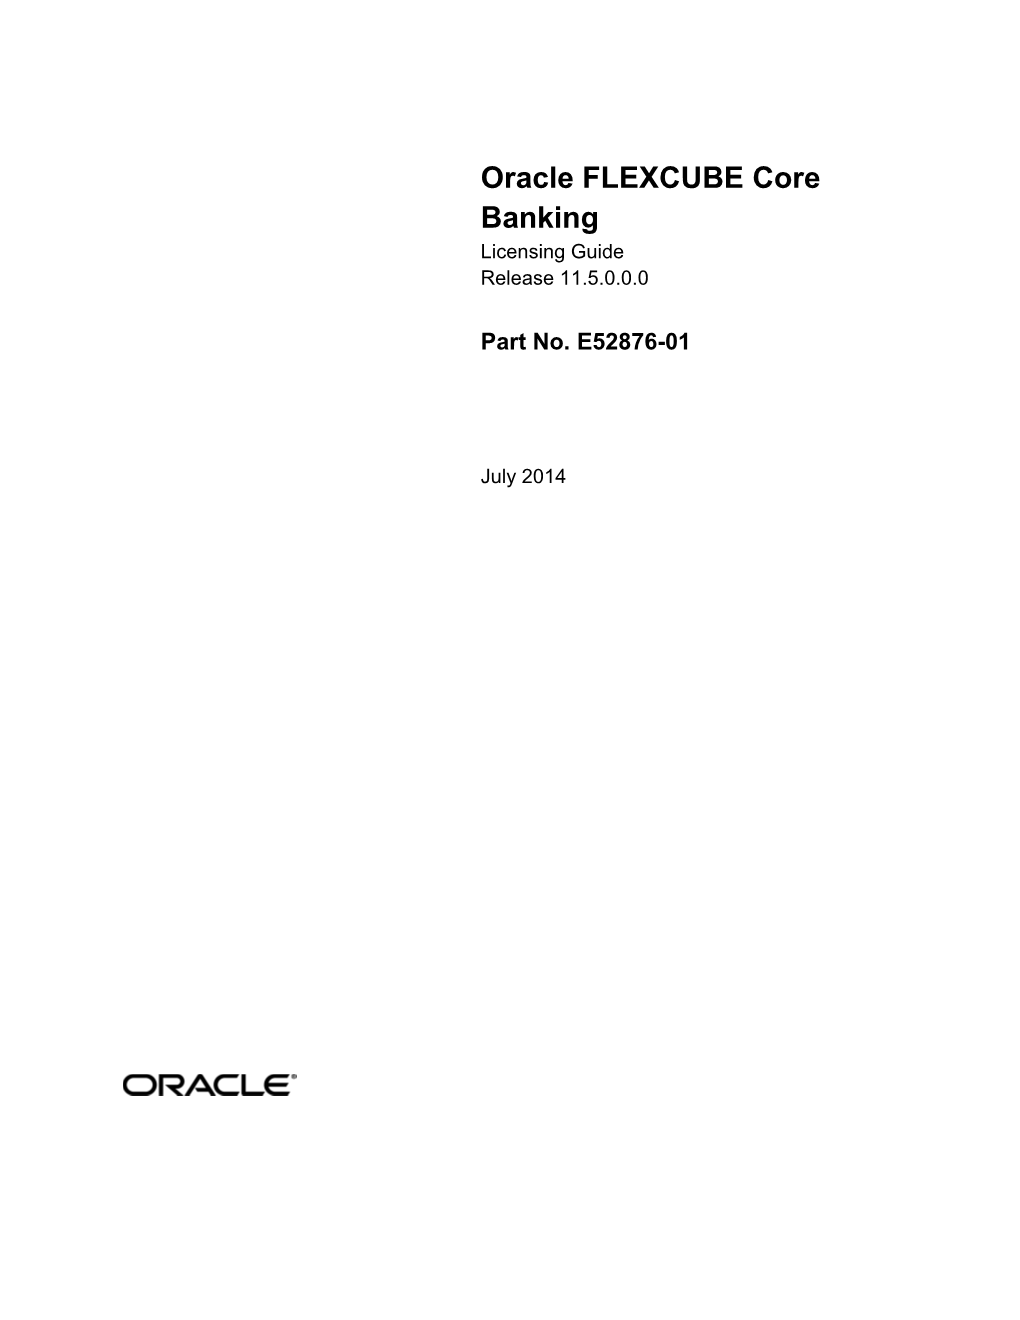 Oracle FLEXCUBE Core Banking Licensing Guide Release 11.5.0.0.0